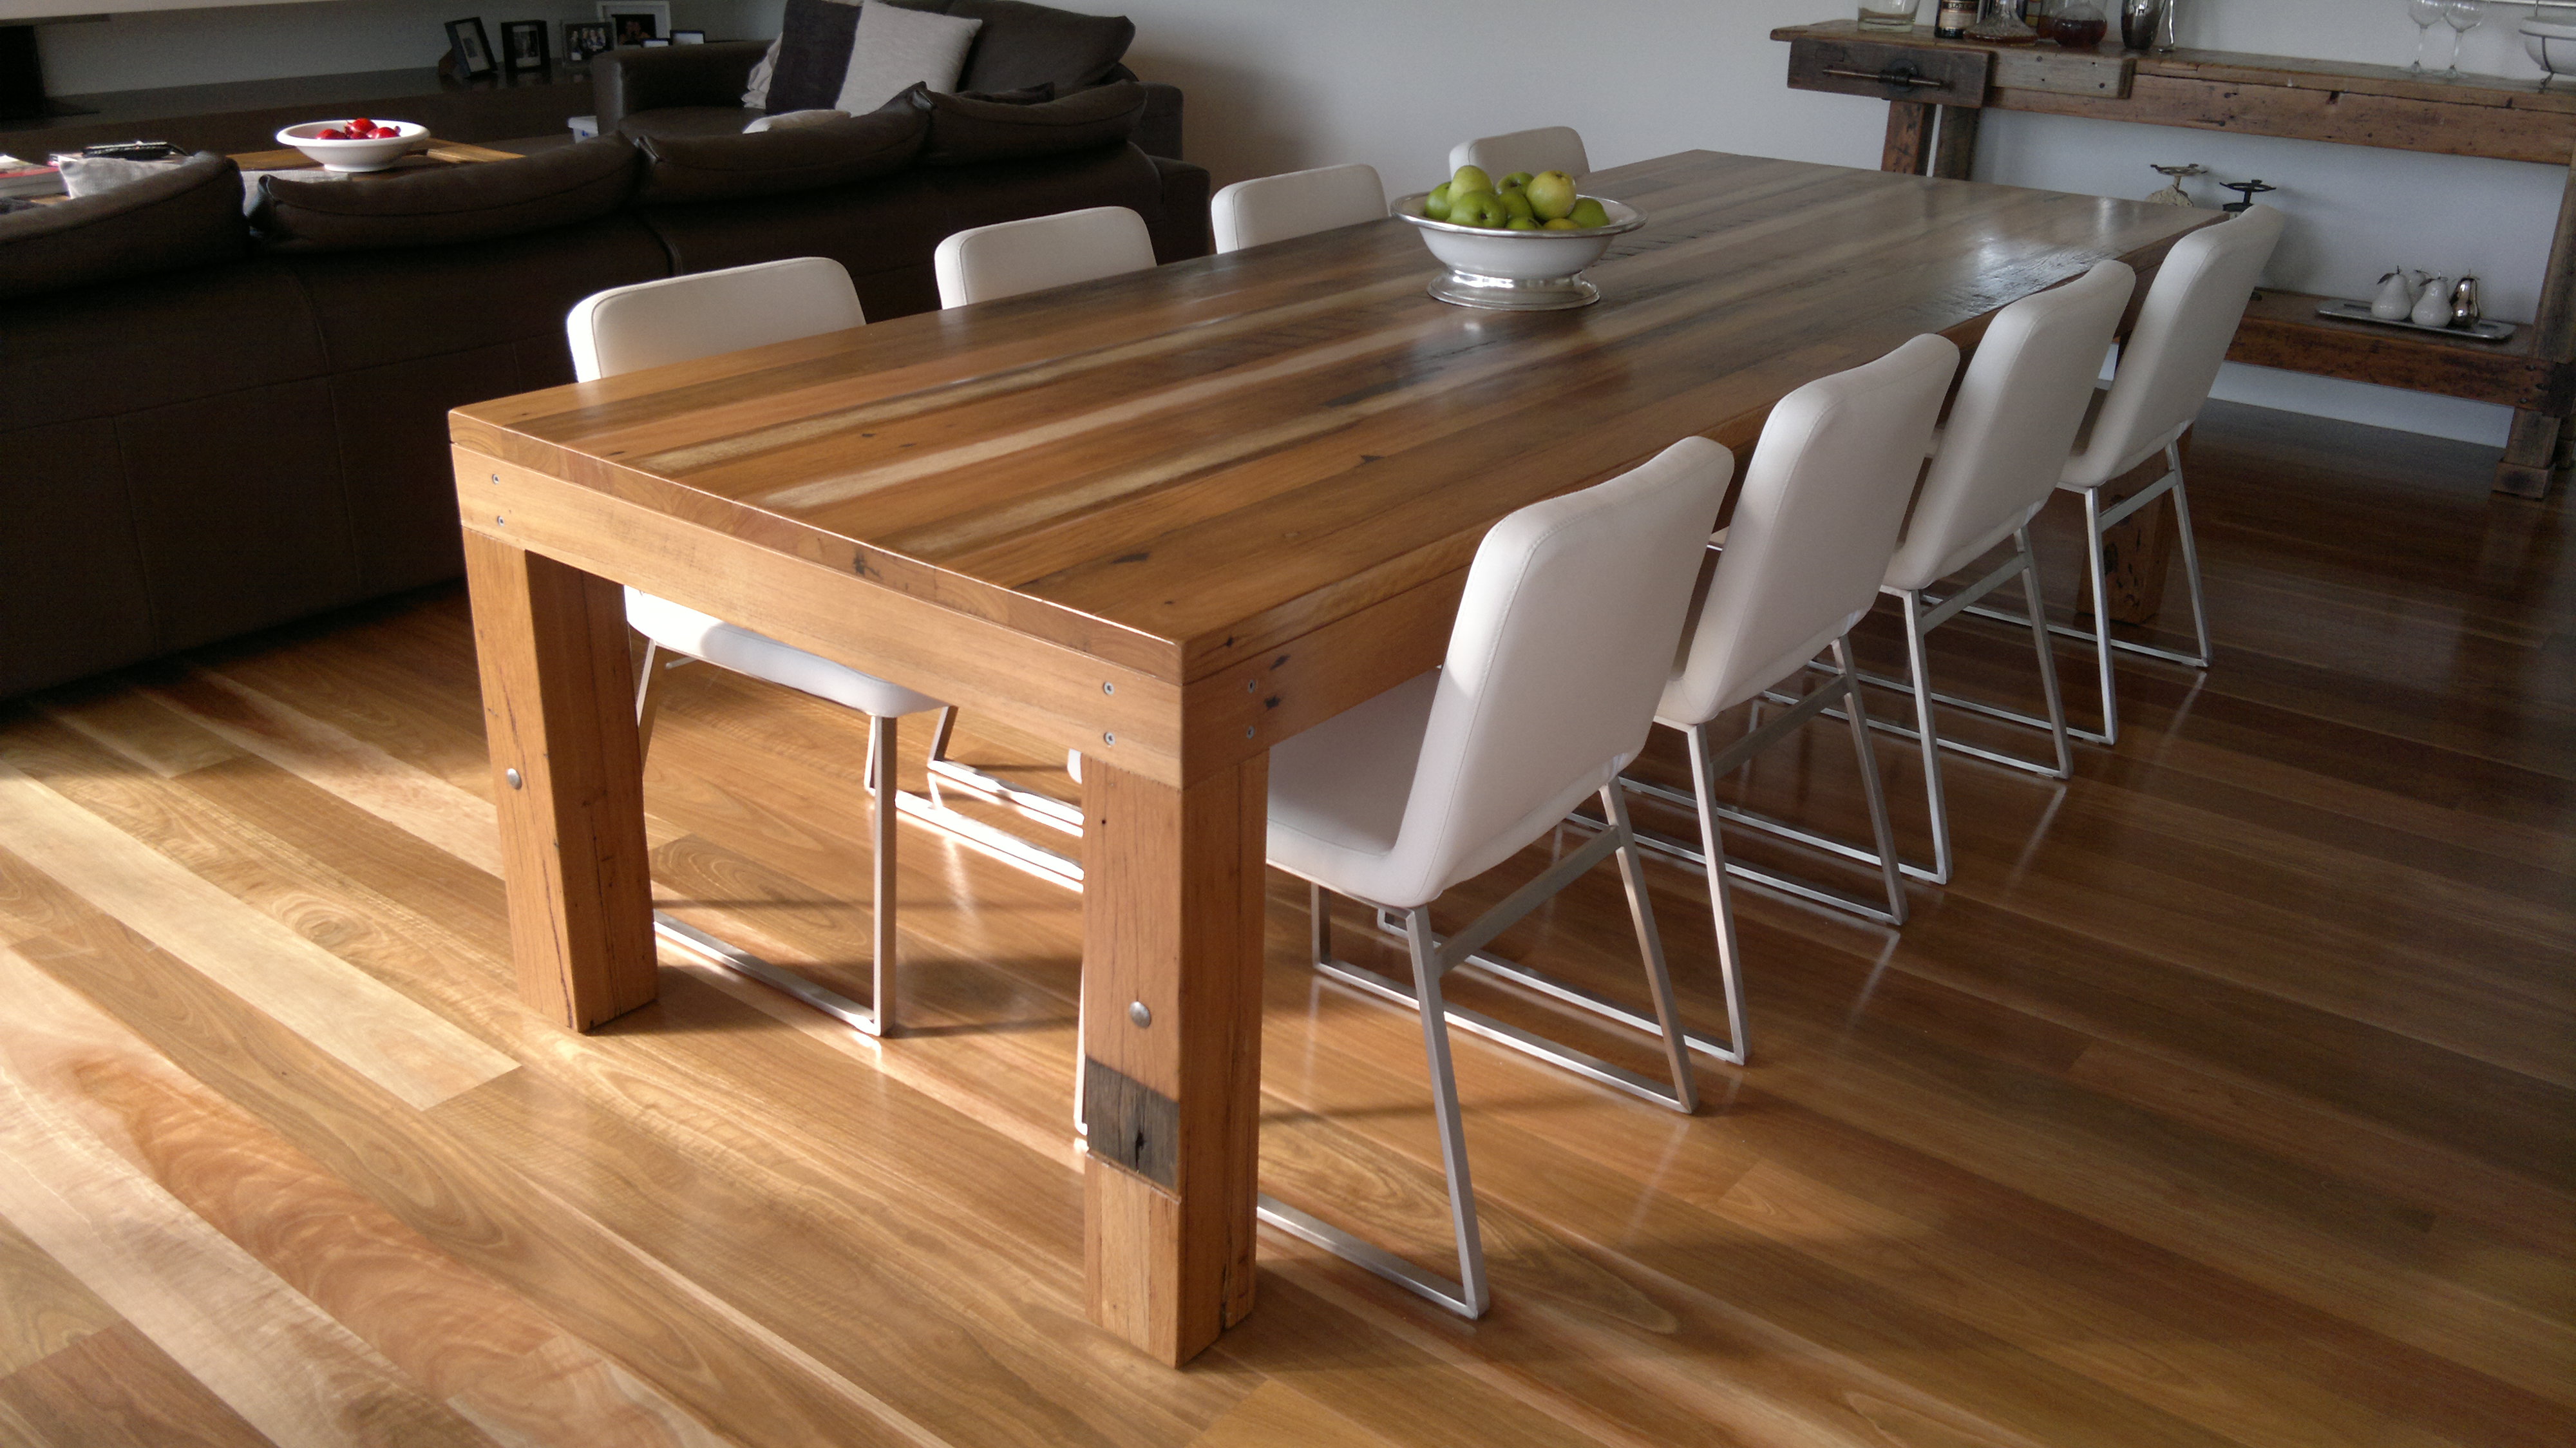 Semi Industrial Dining Table - Mixed Hardwoods - Recycled Lane